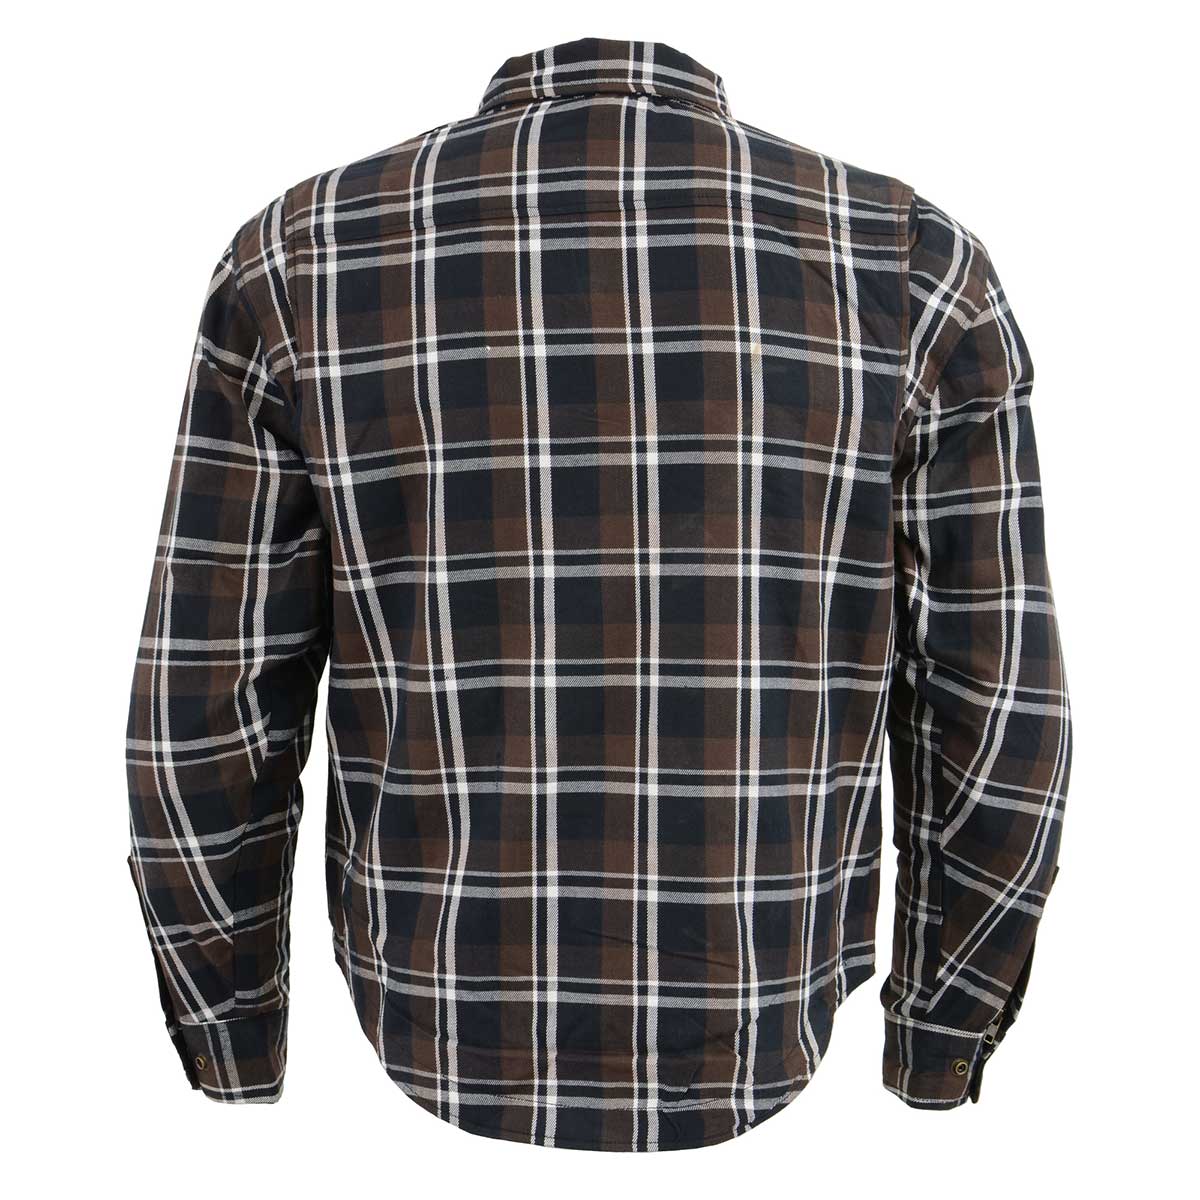 Men's Brown, Black and White Armored Long Sleeve Flannel Shirt with Kevlar